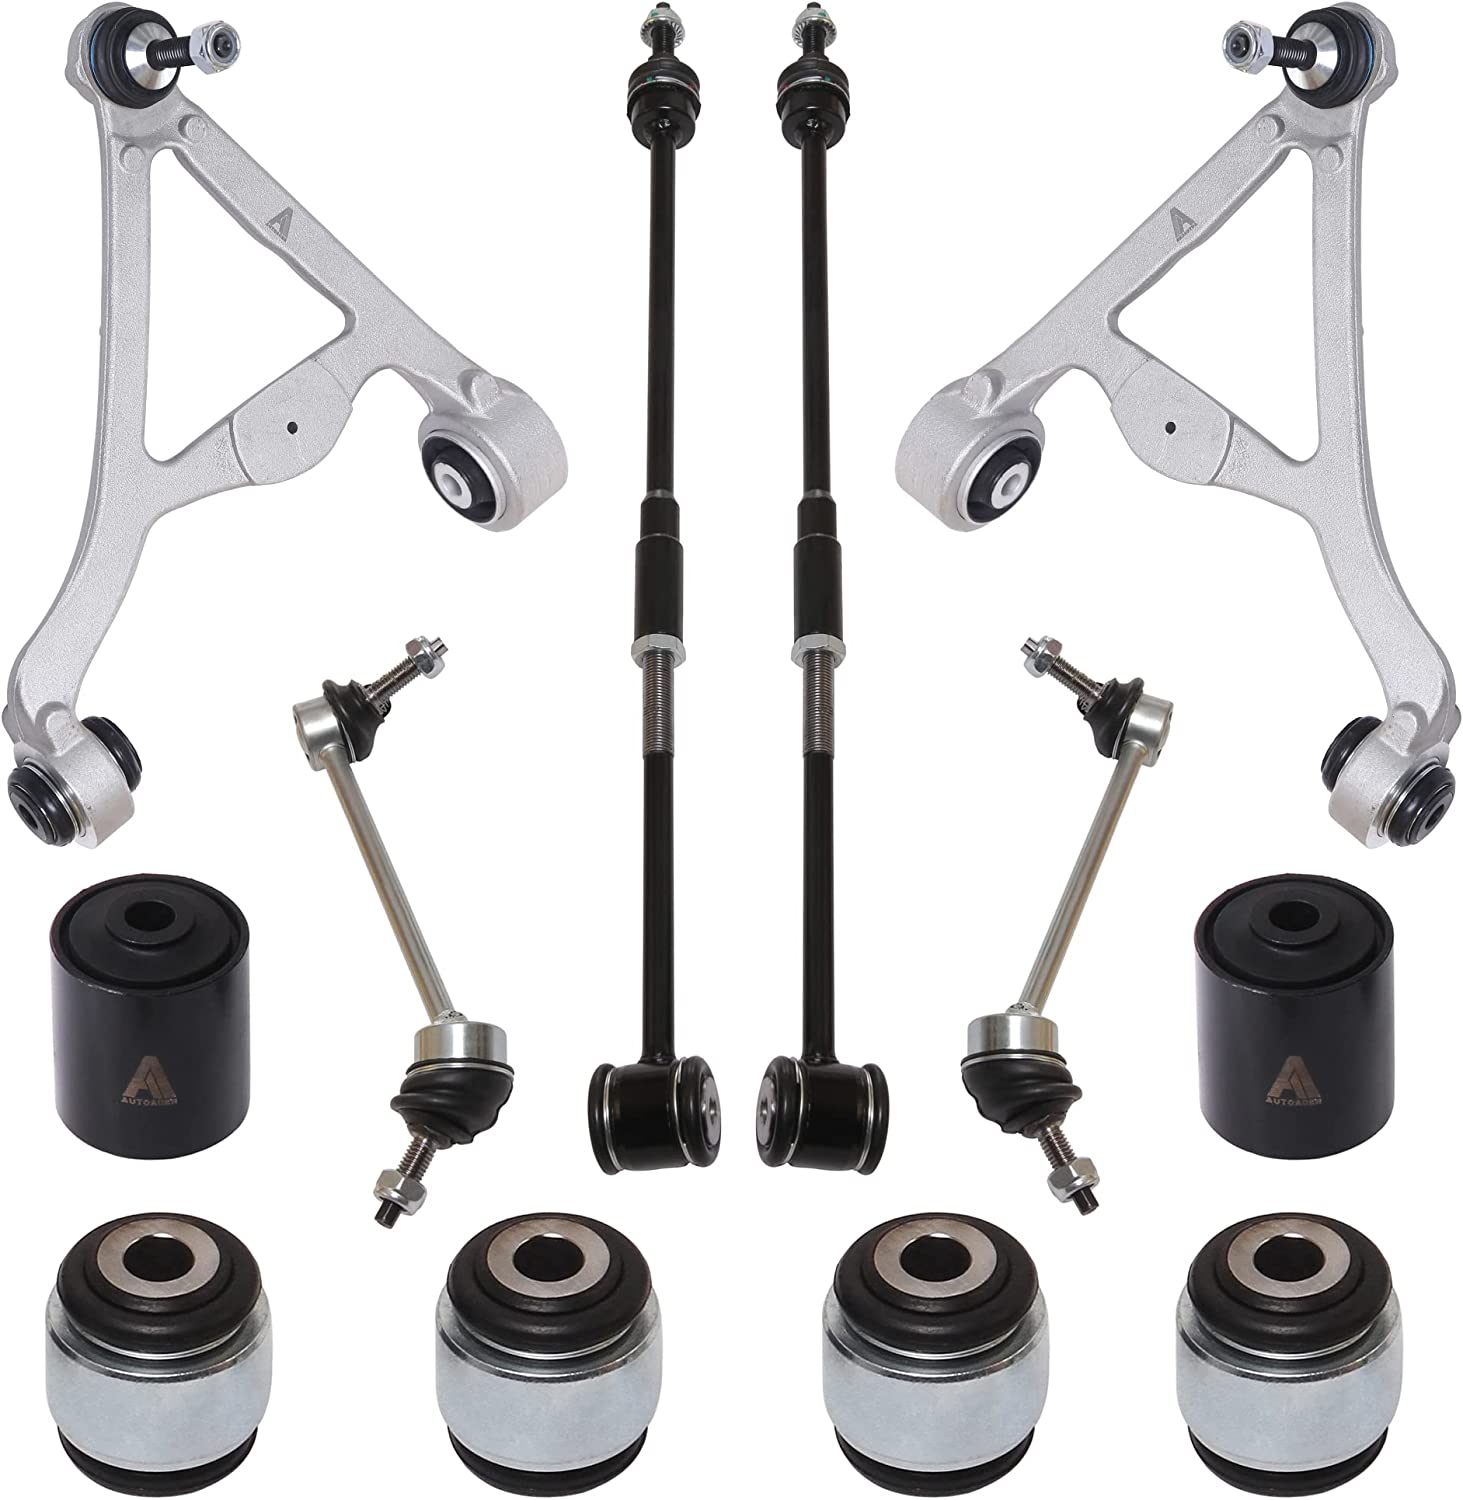 AUTOACER - Rear Upper Control Arms + Lower Control Arm Bushing (6 Hydro Bushings Fluid Filled) + Rear Tie Rod and Sway Bar Link Kit 12pcs - Year XJ